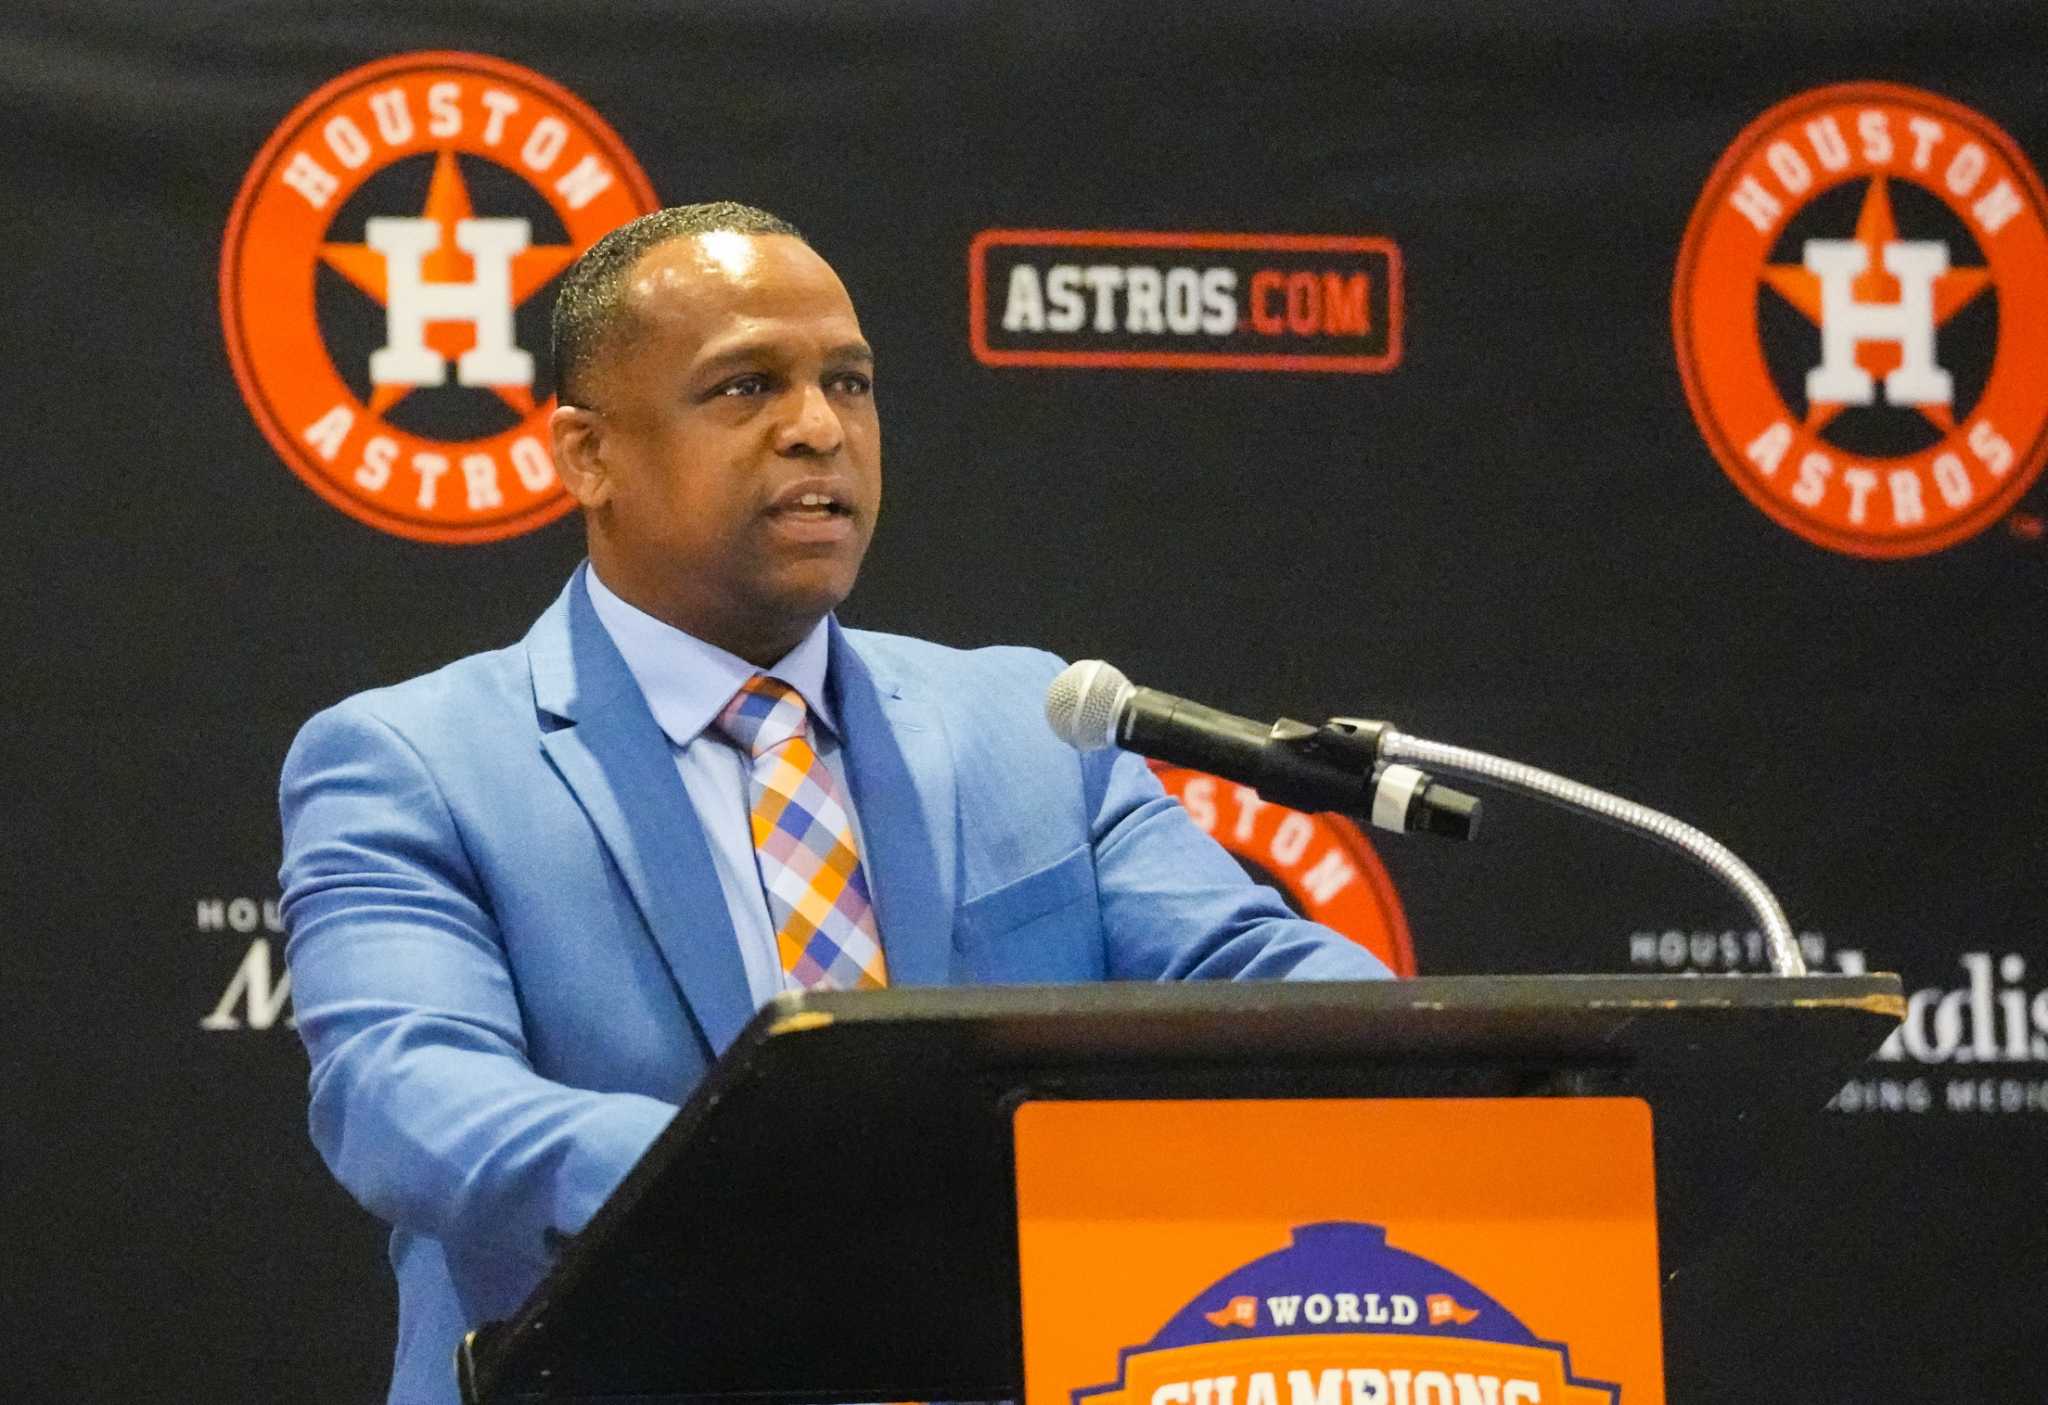 Houston Astros: GM bullish on get-rich-quicker deals for players